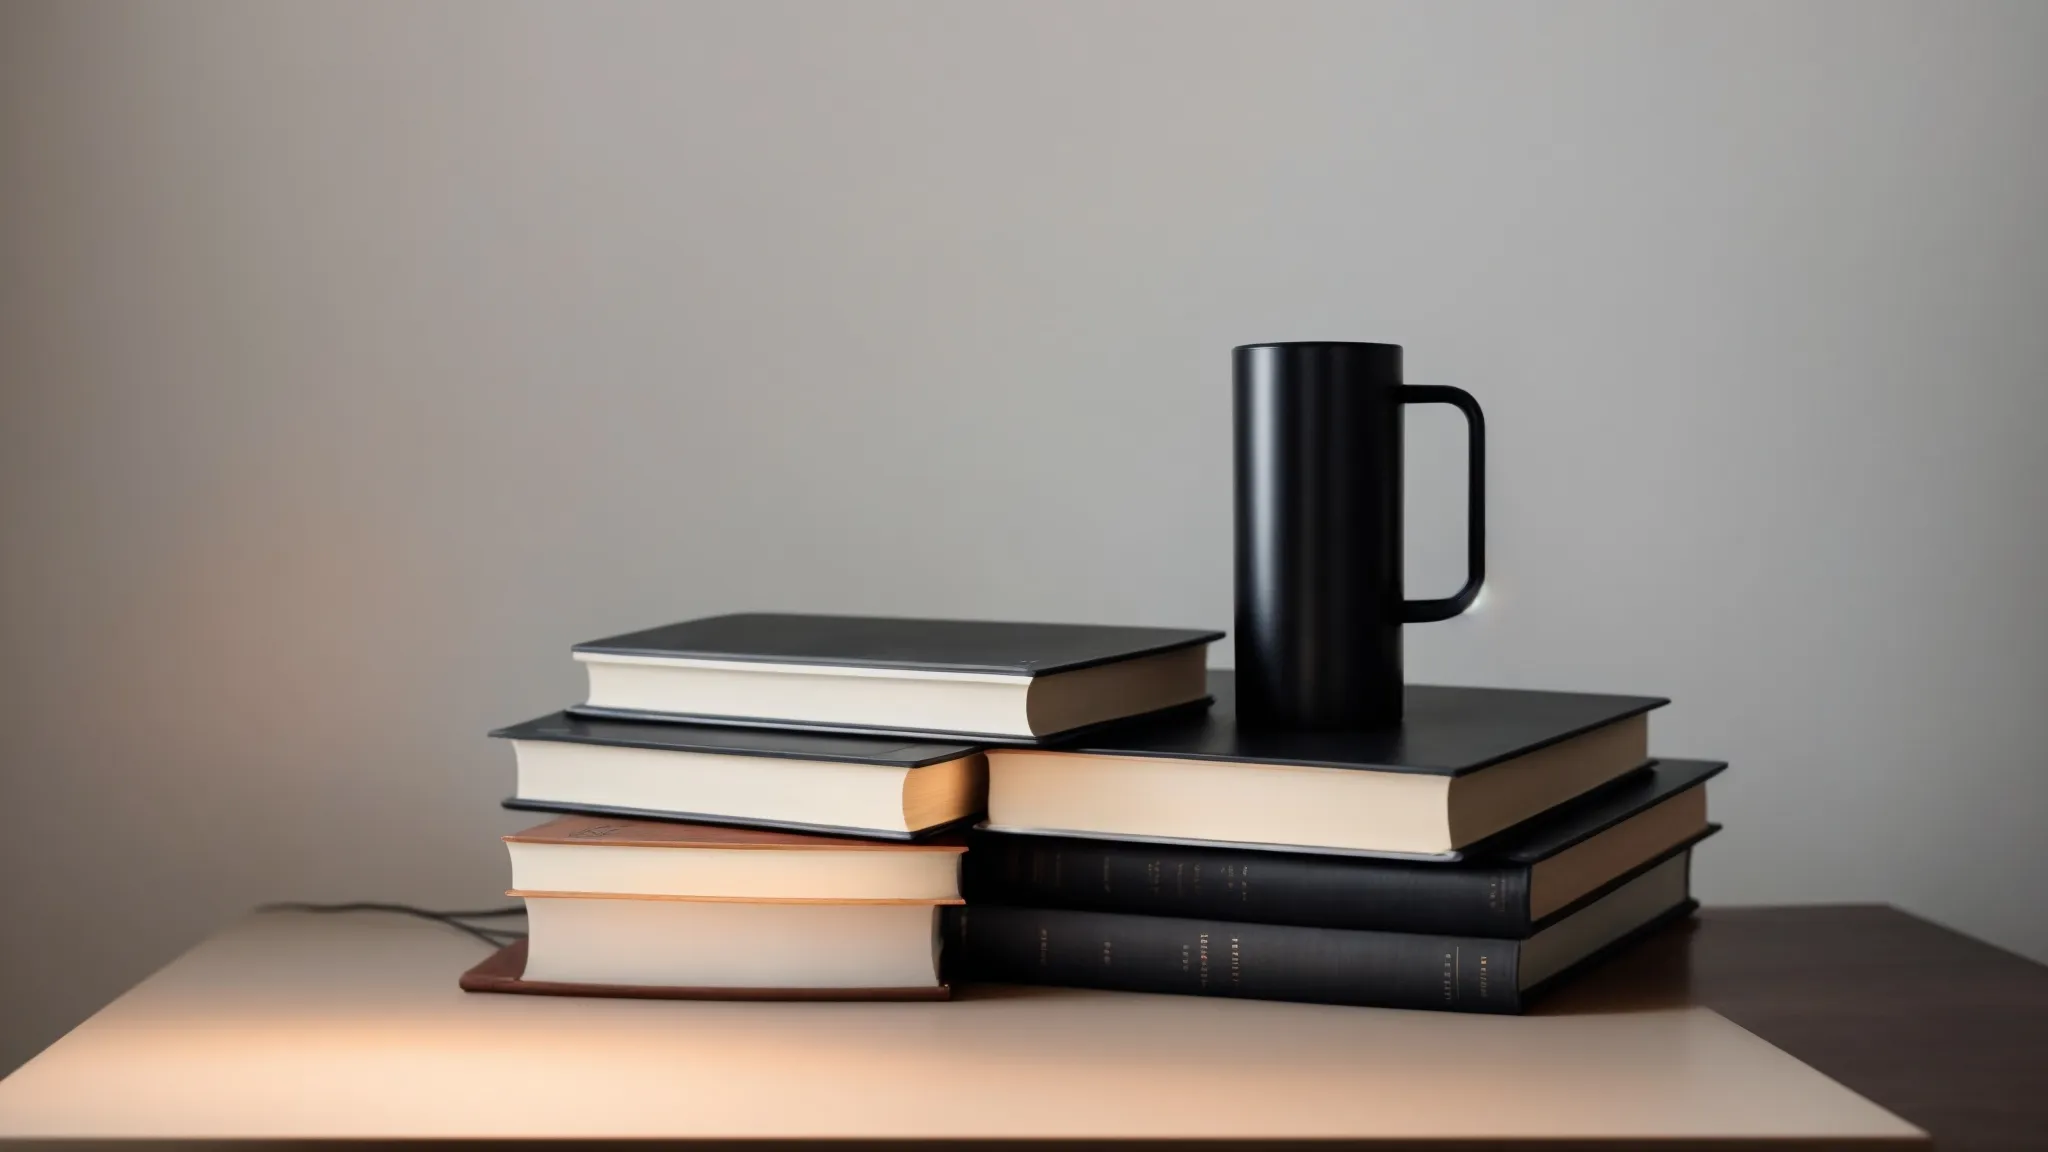 a stack of hardcover books on a sleek, modern desk, illuminated by the soft glow of a minimalist lamp, with a digital tablet and a cup of coffee alongside.